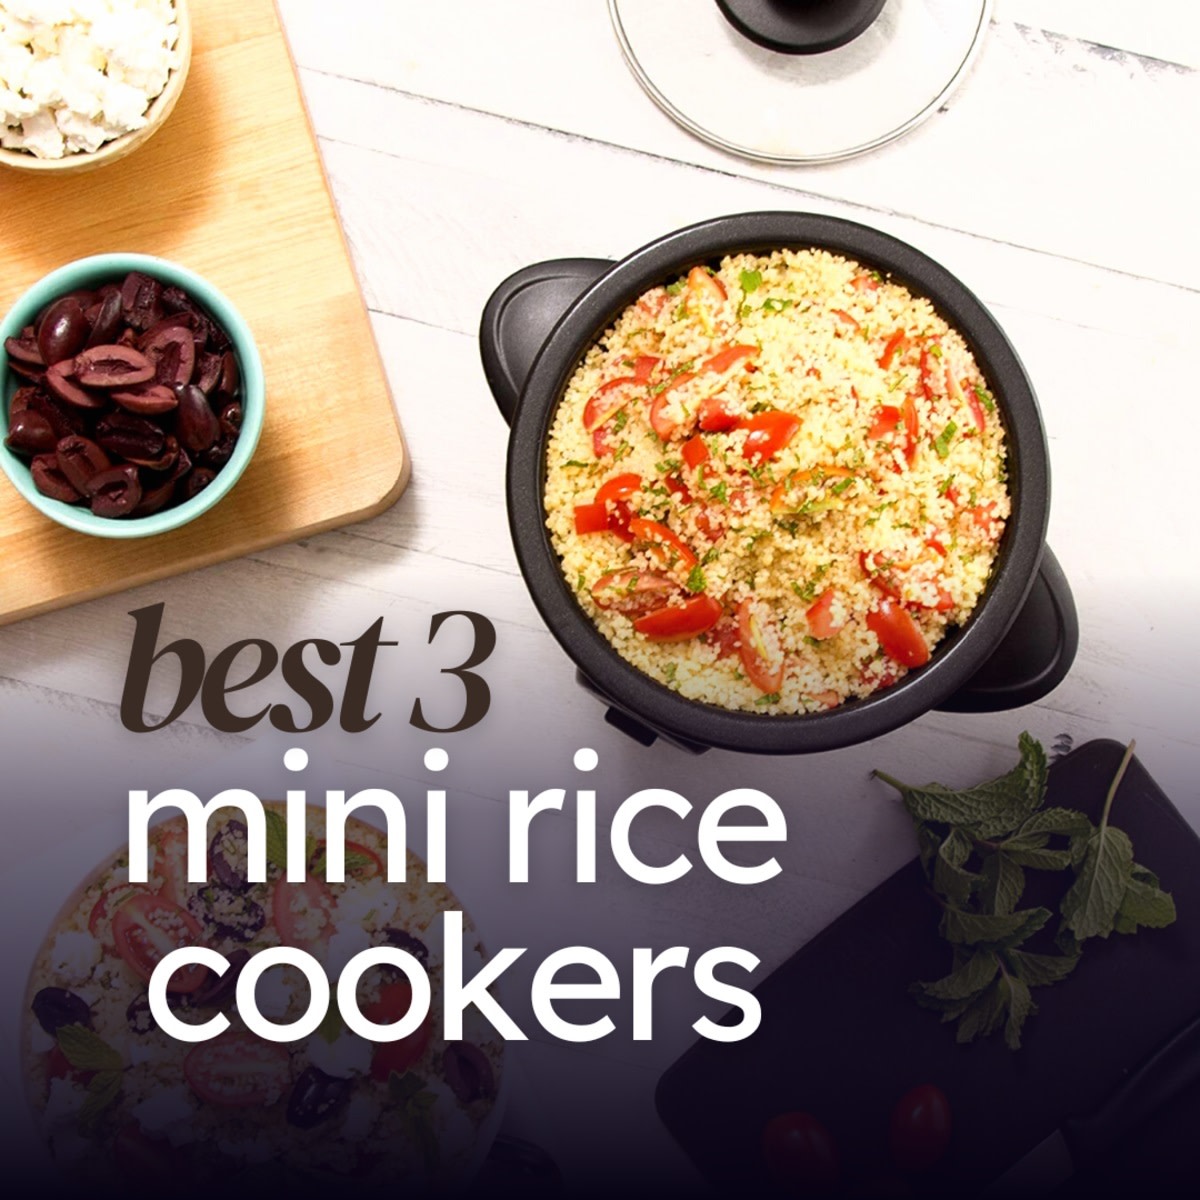 Mishcdea Small Rice Cooker 3-Cup Uncooked, Mini Rice Cooker